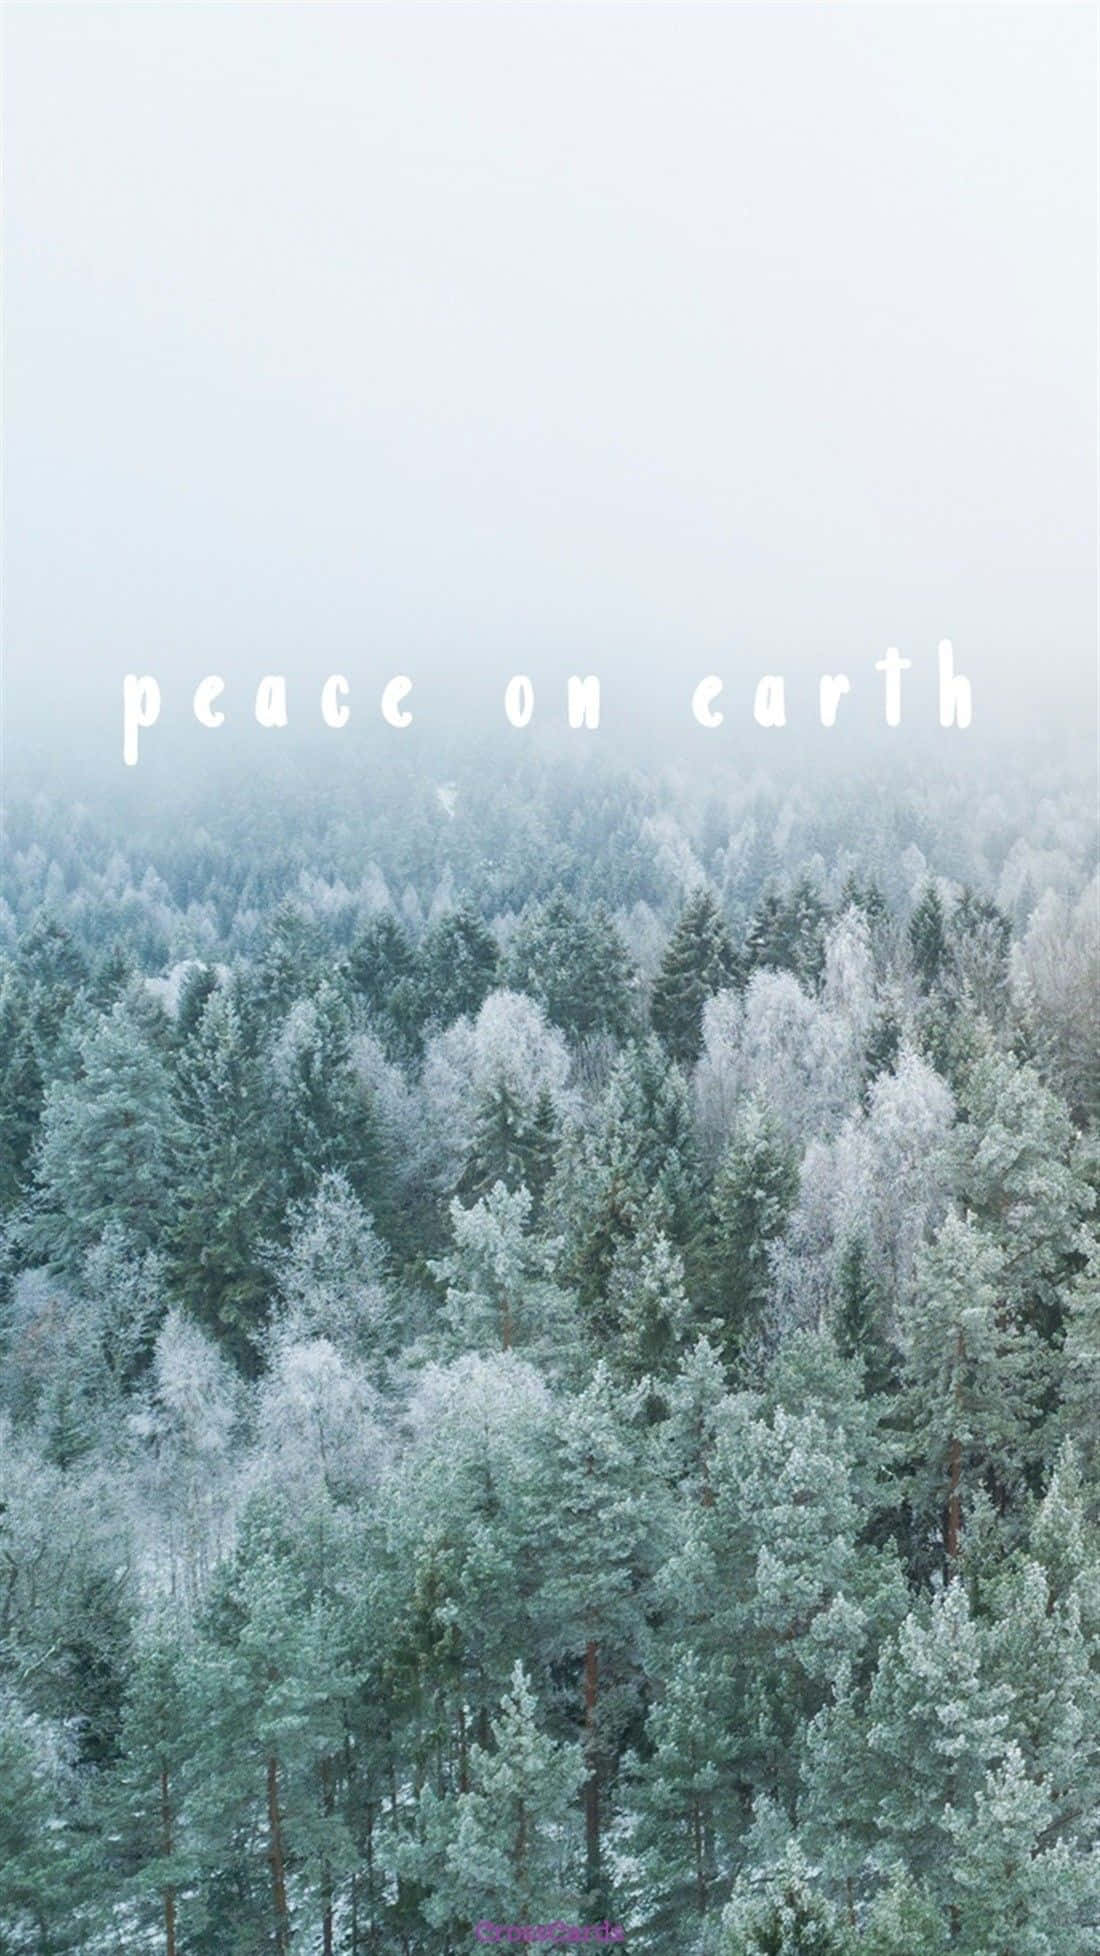 Peace On Earth - A Photo Of Trees And Snow